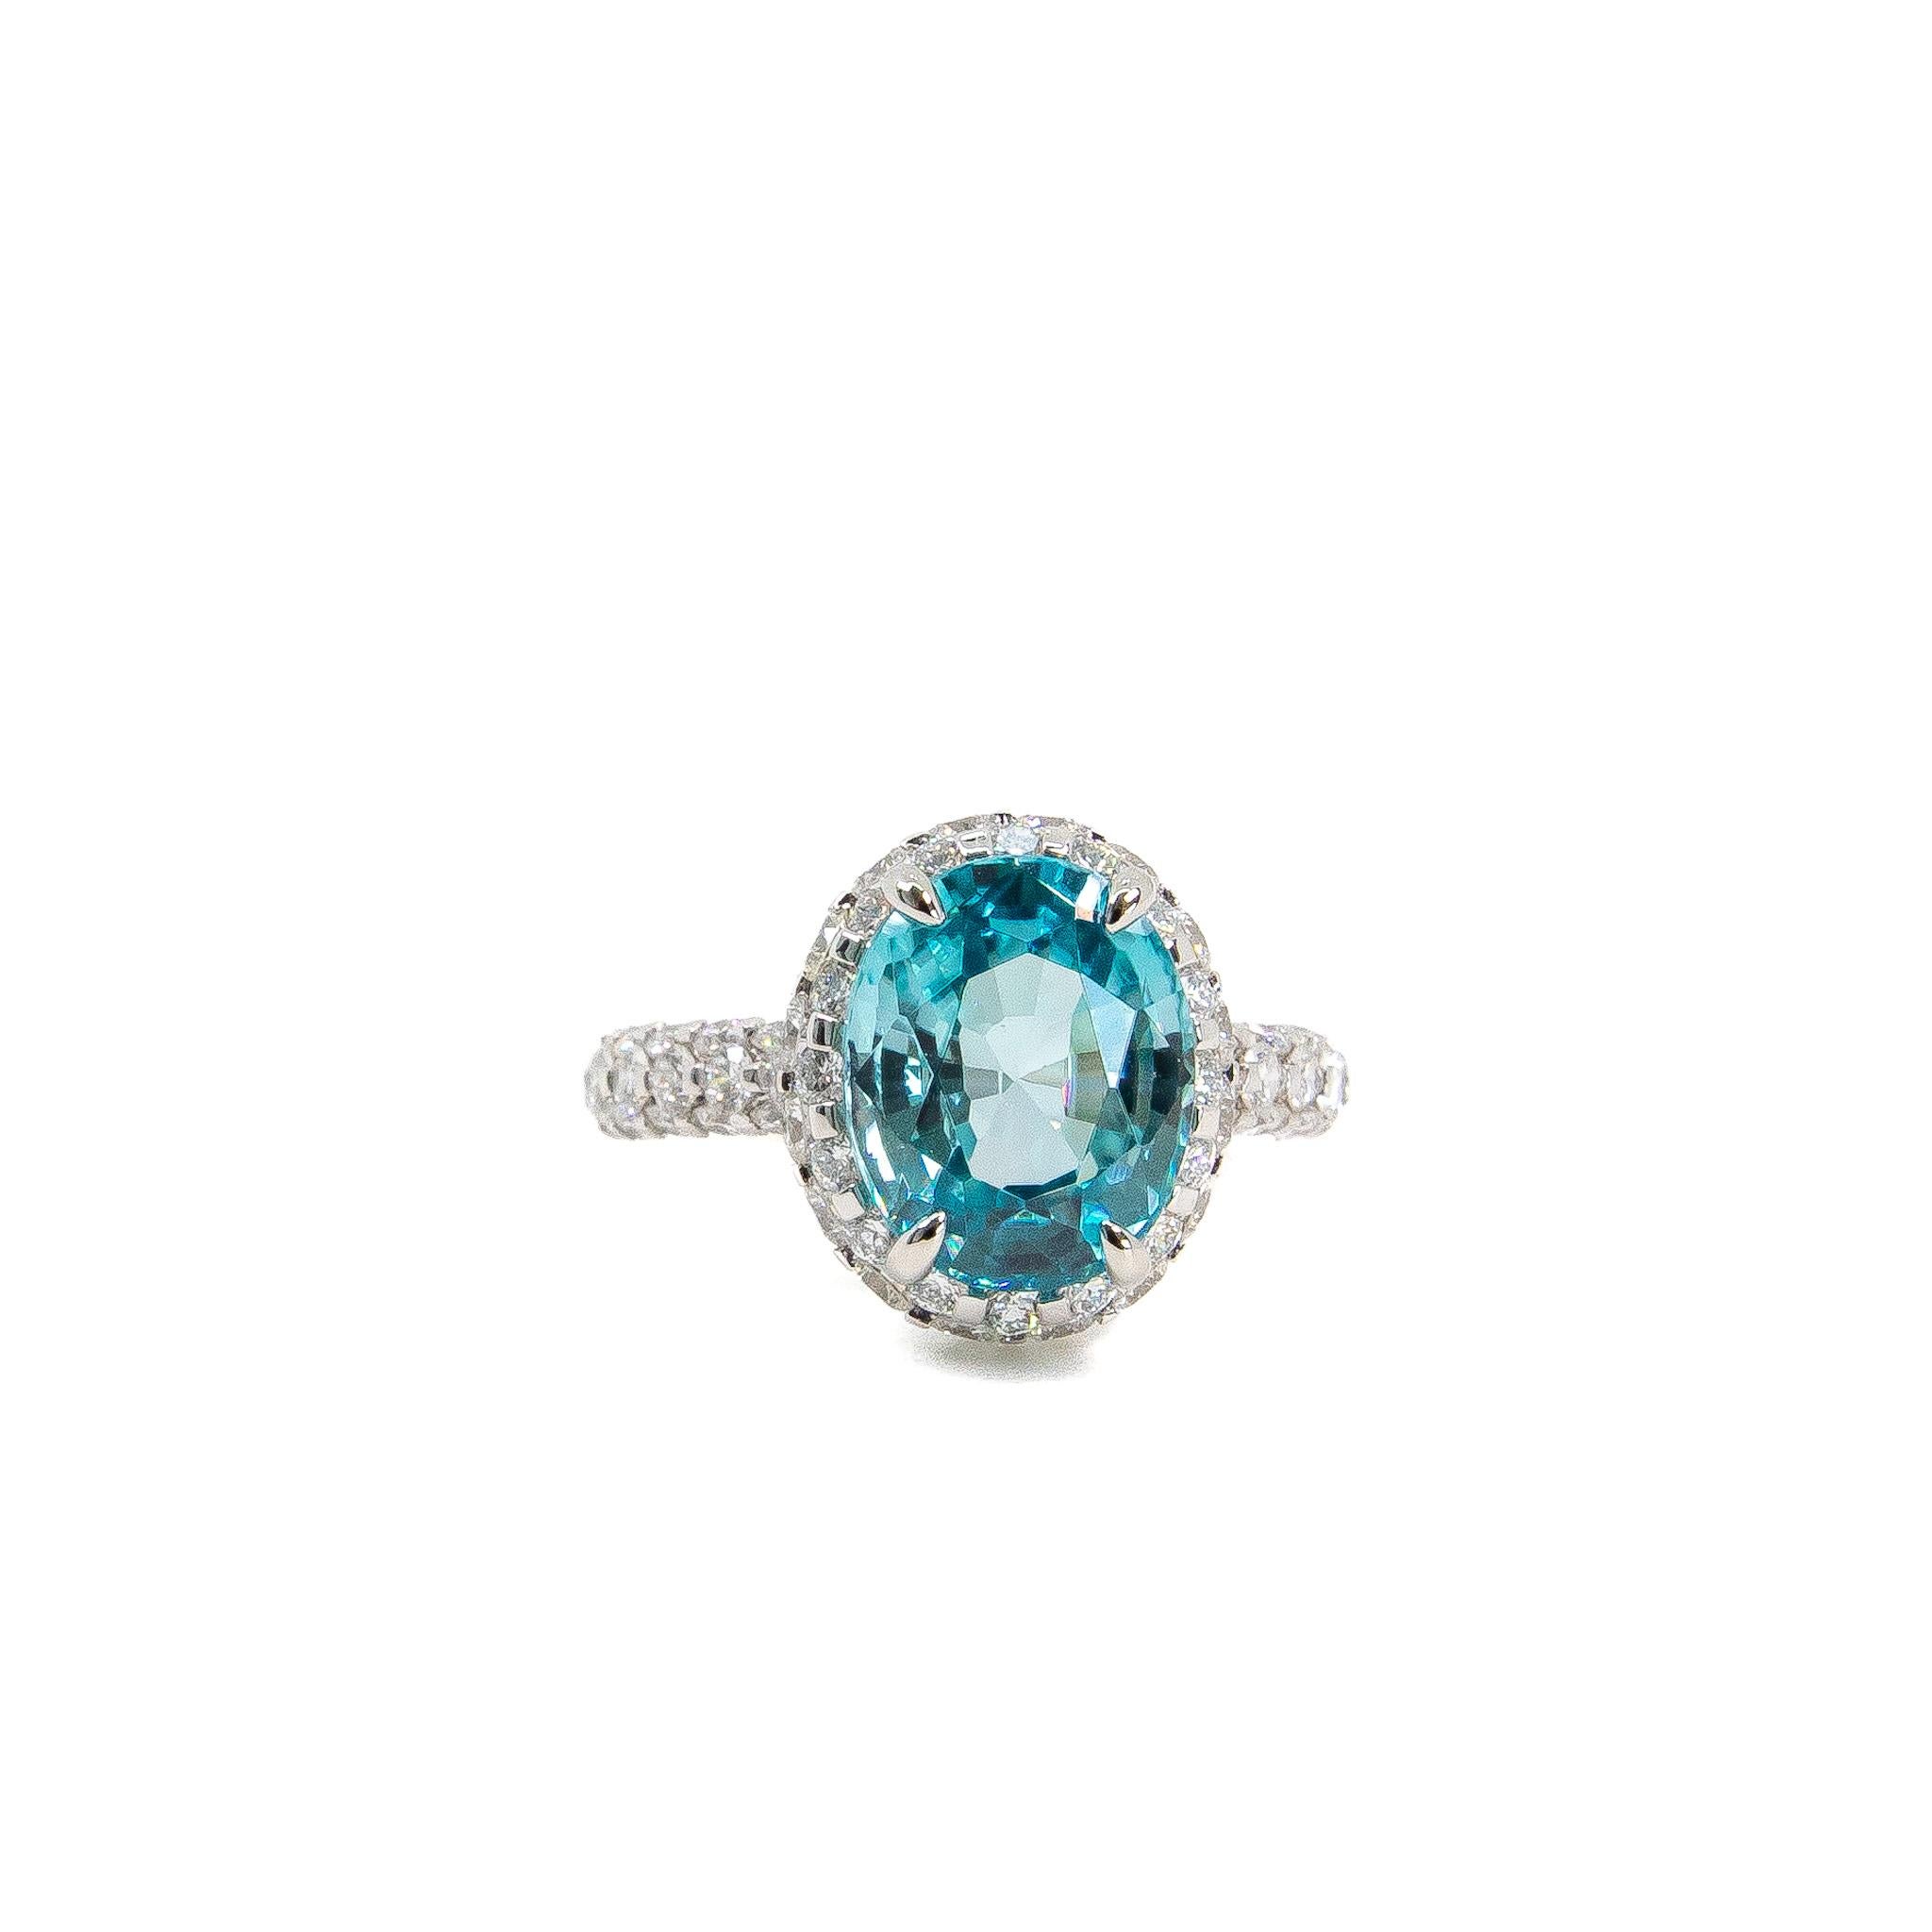 Custom-made stunning delicate pale blue oval cut natural Zircon of 5-6ct surrounded by around 1.71ct of dazzling round brilliant colourless diamonds. 

Zircon is a natural, magnificent, and underrated gemstone that has been worn and treasured since